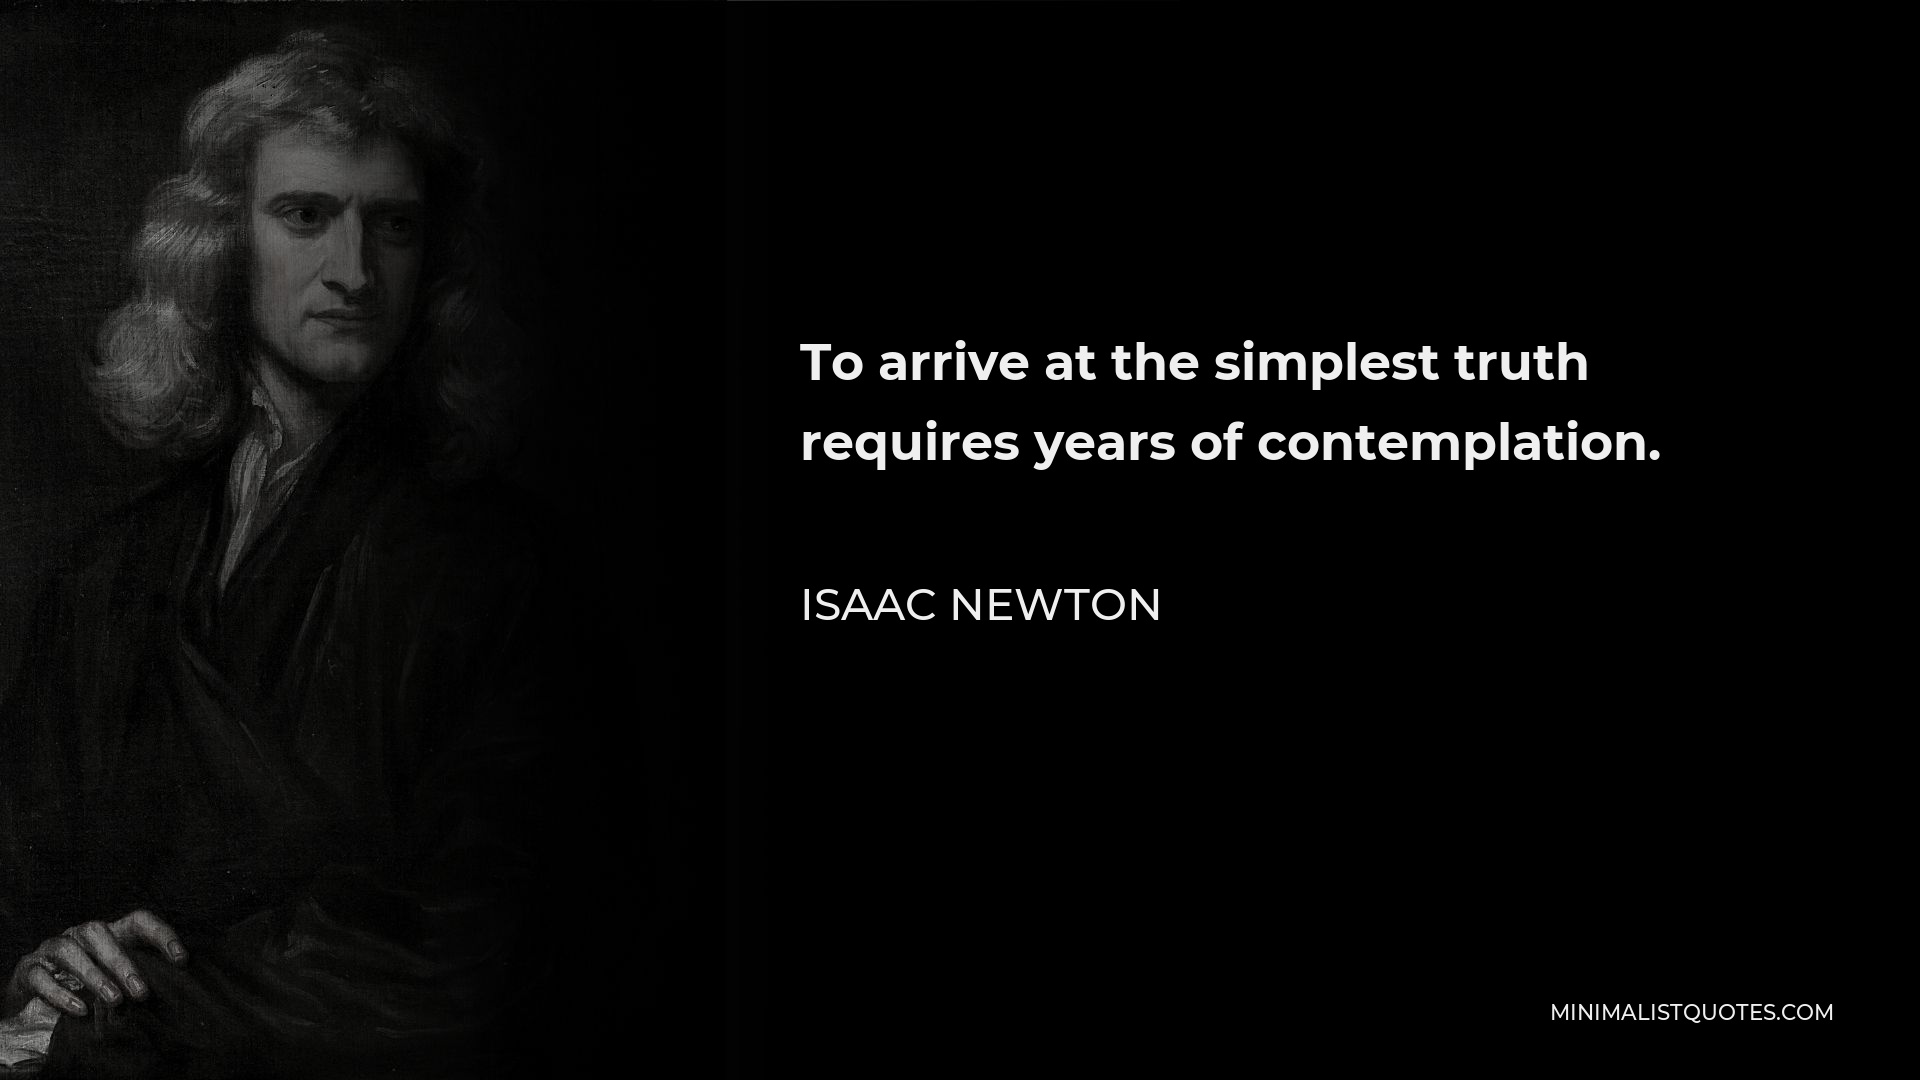 Isaac Newton Quote - To arrive at the simplest truth requires years of contemplation.